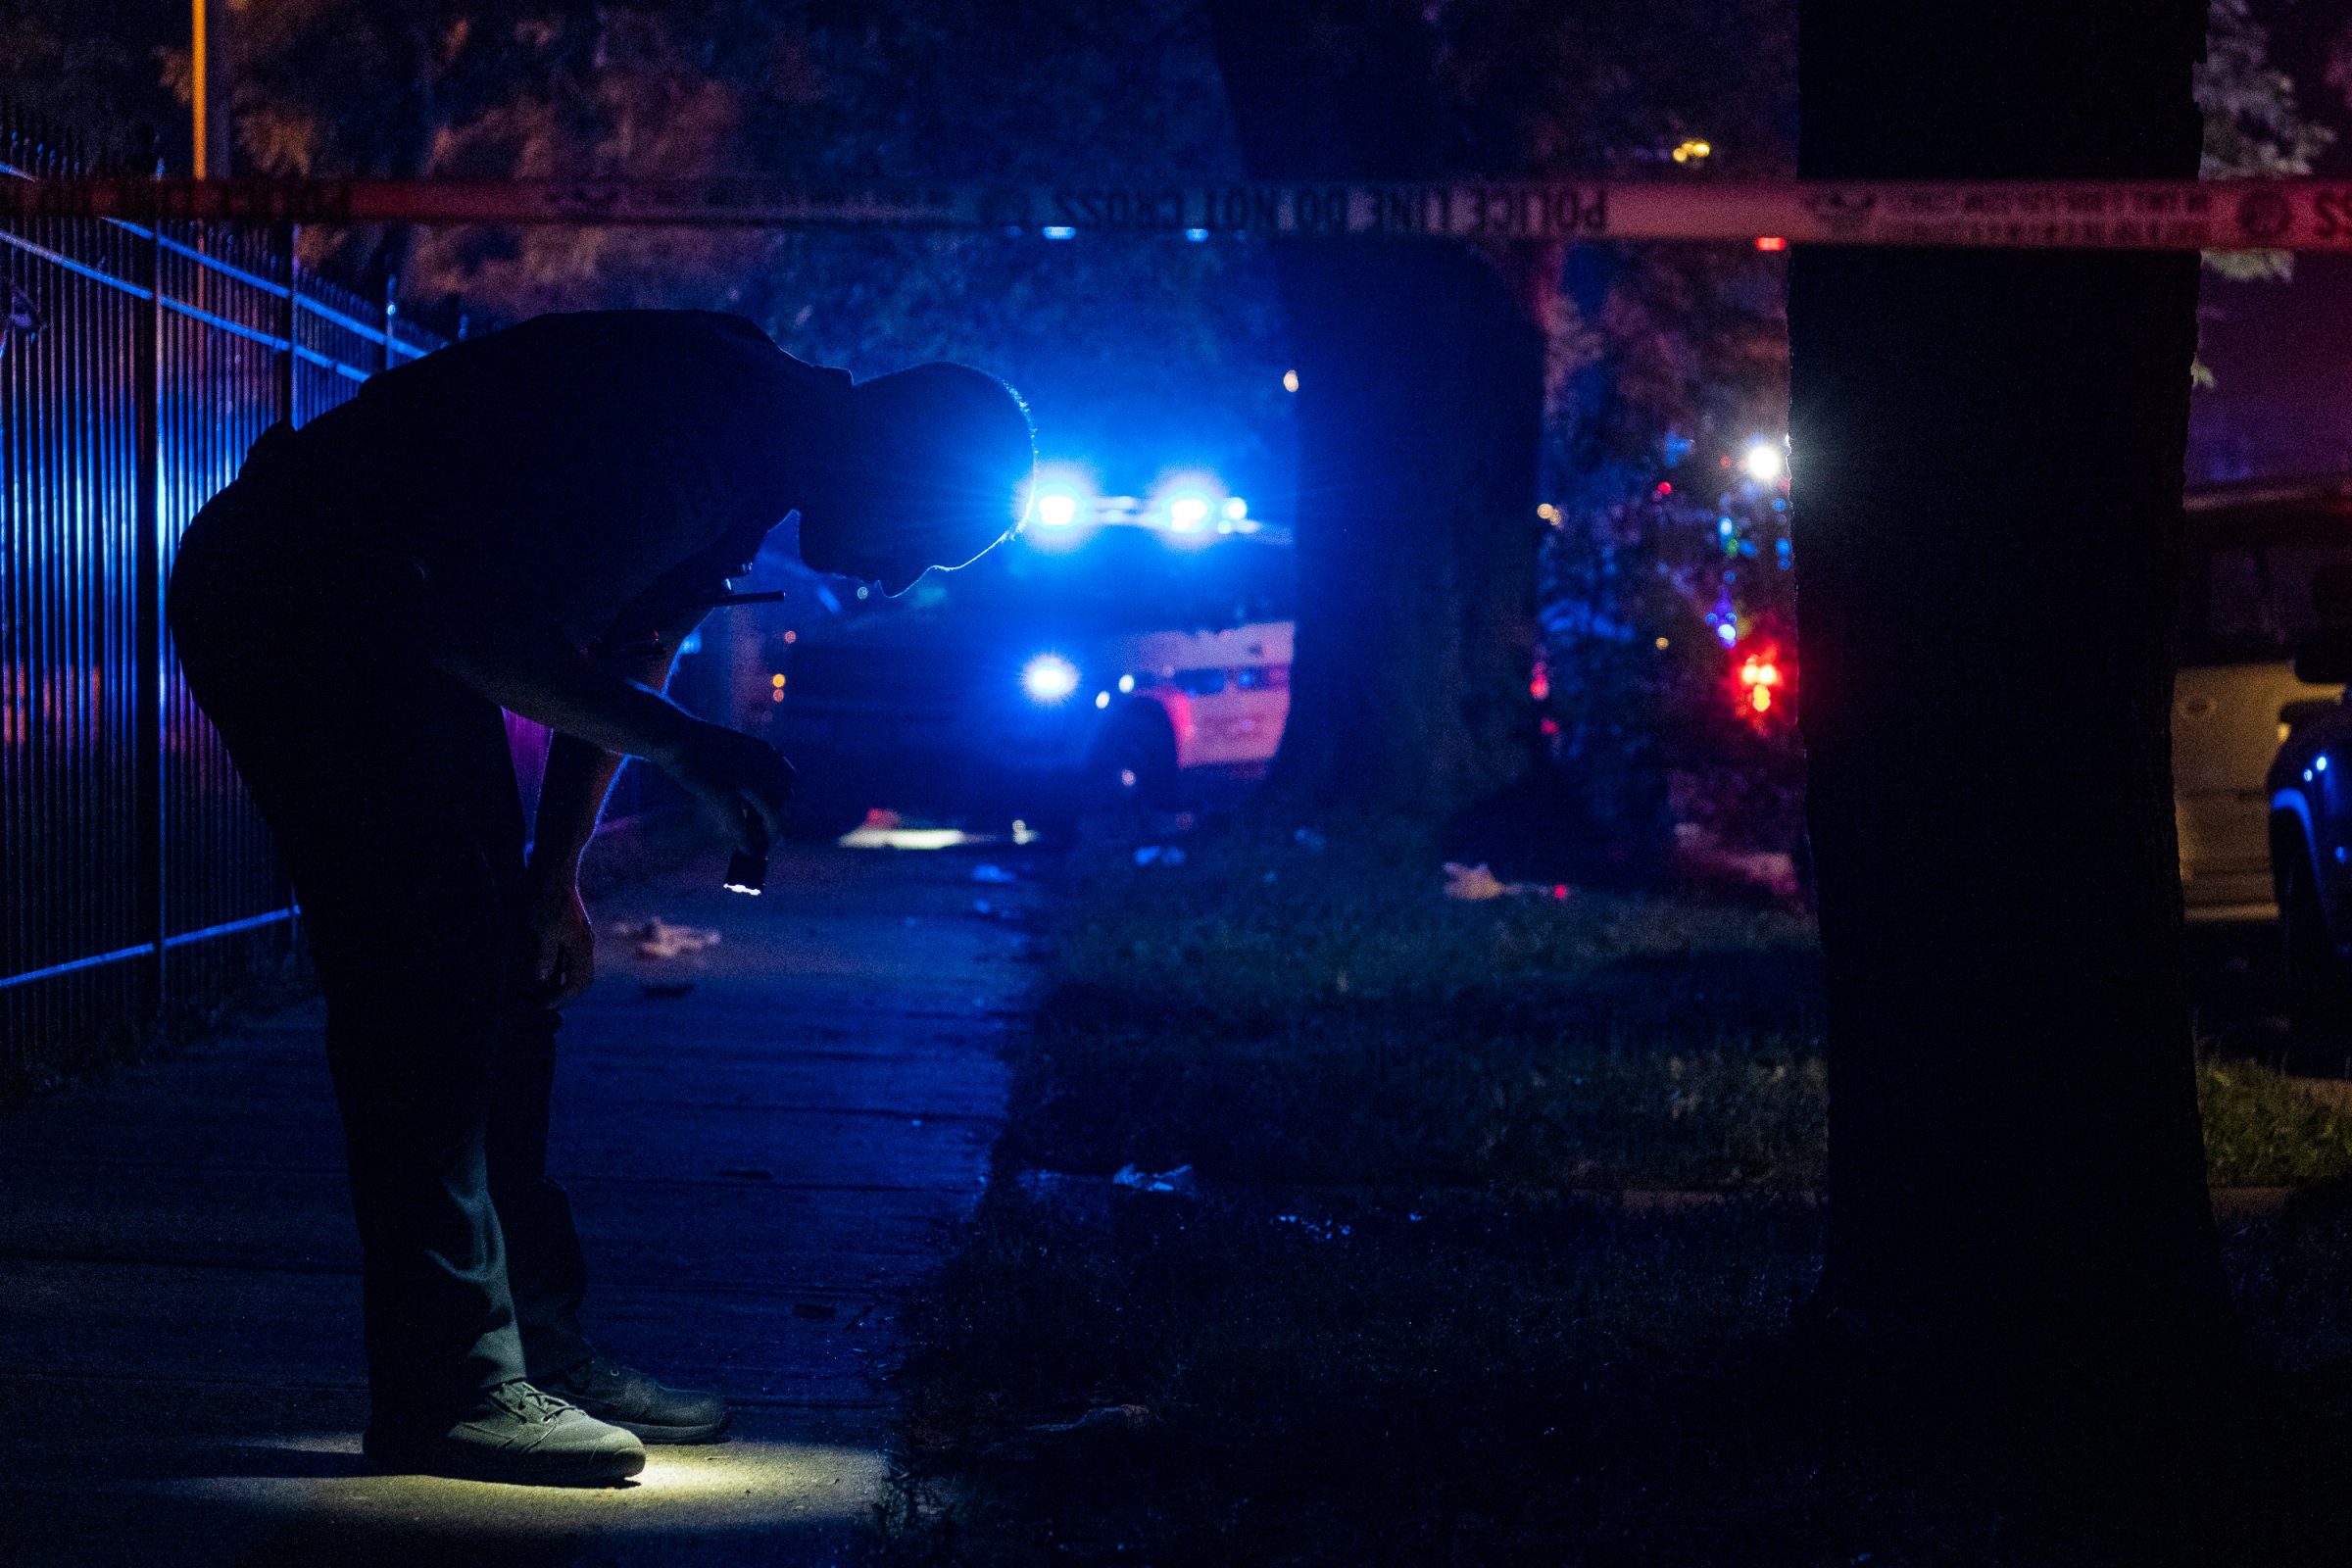 A detailed report from the University of Illinois at Chicago reveals the strain and trauma that many frontline violence prevention workers face as they try to combat gun violence in the Chicago neighborhoods.